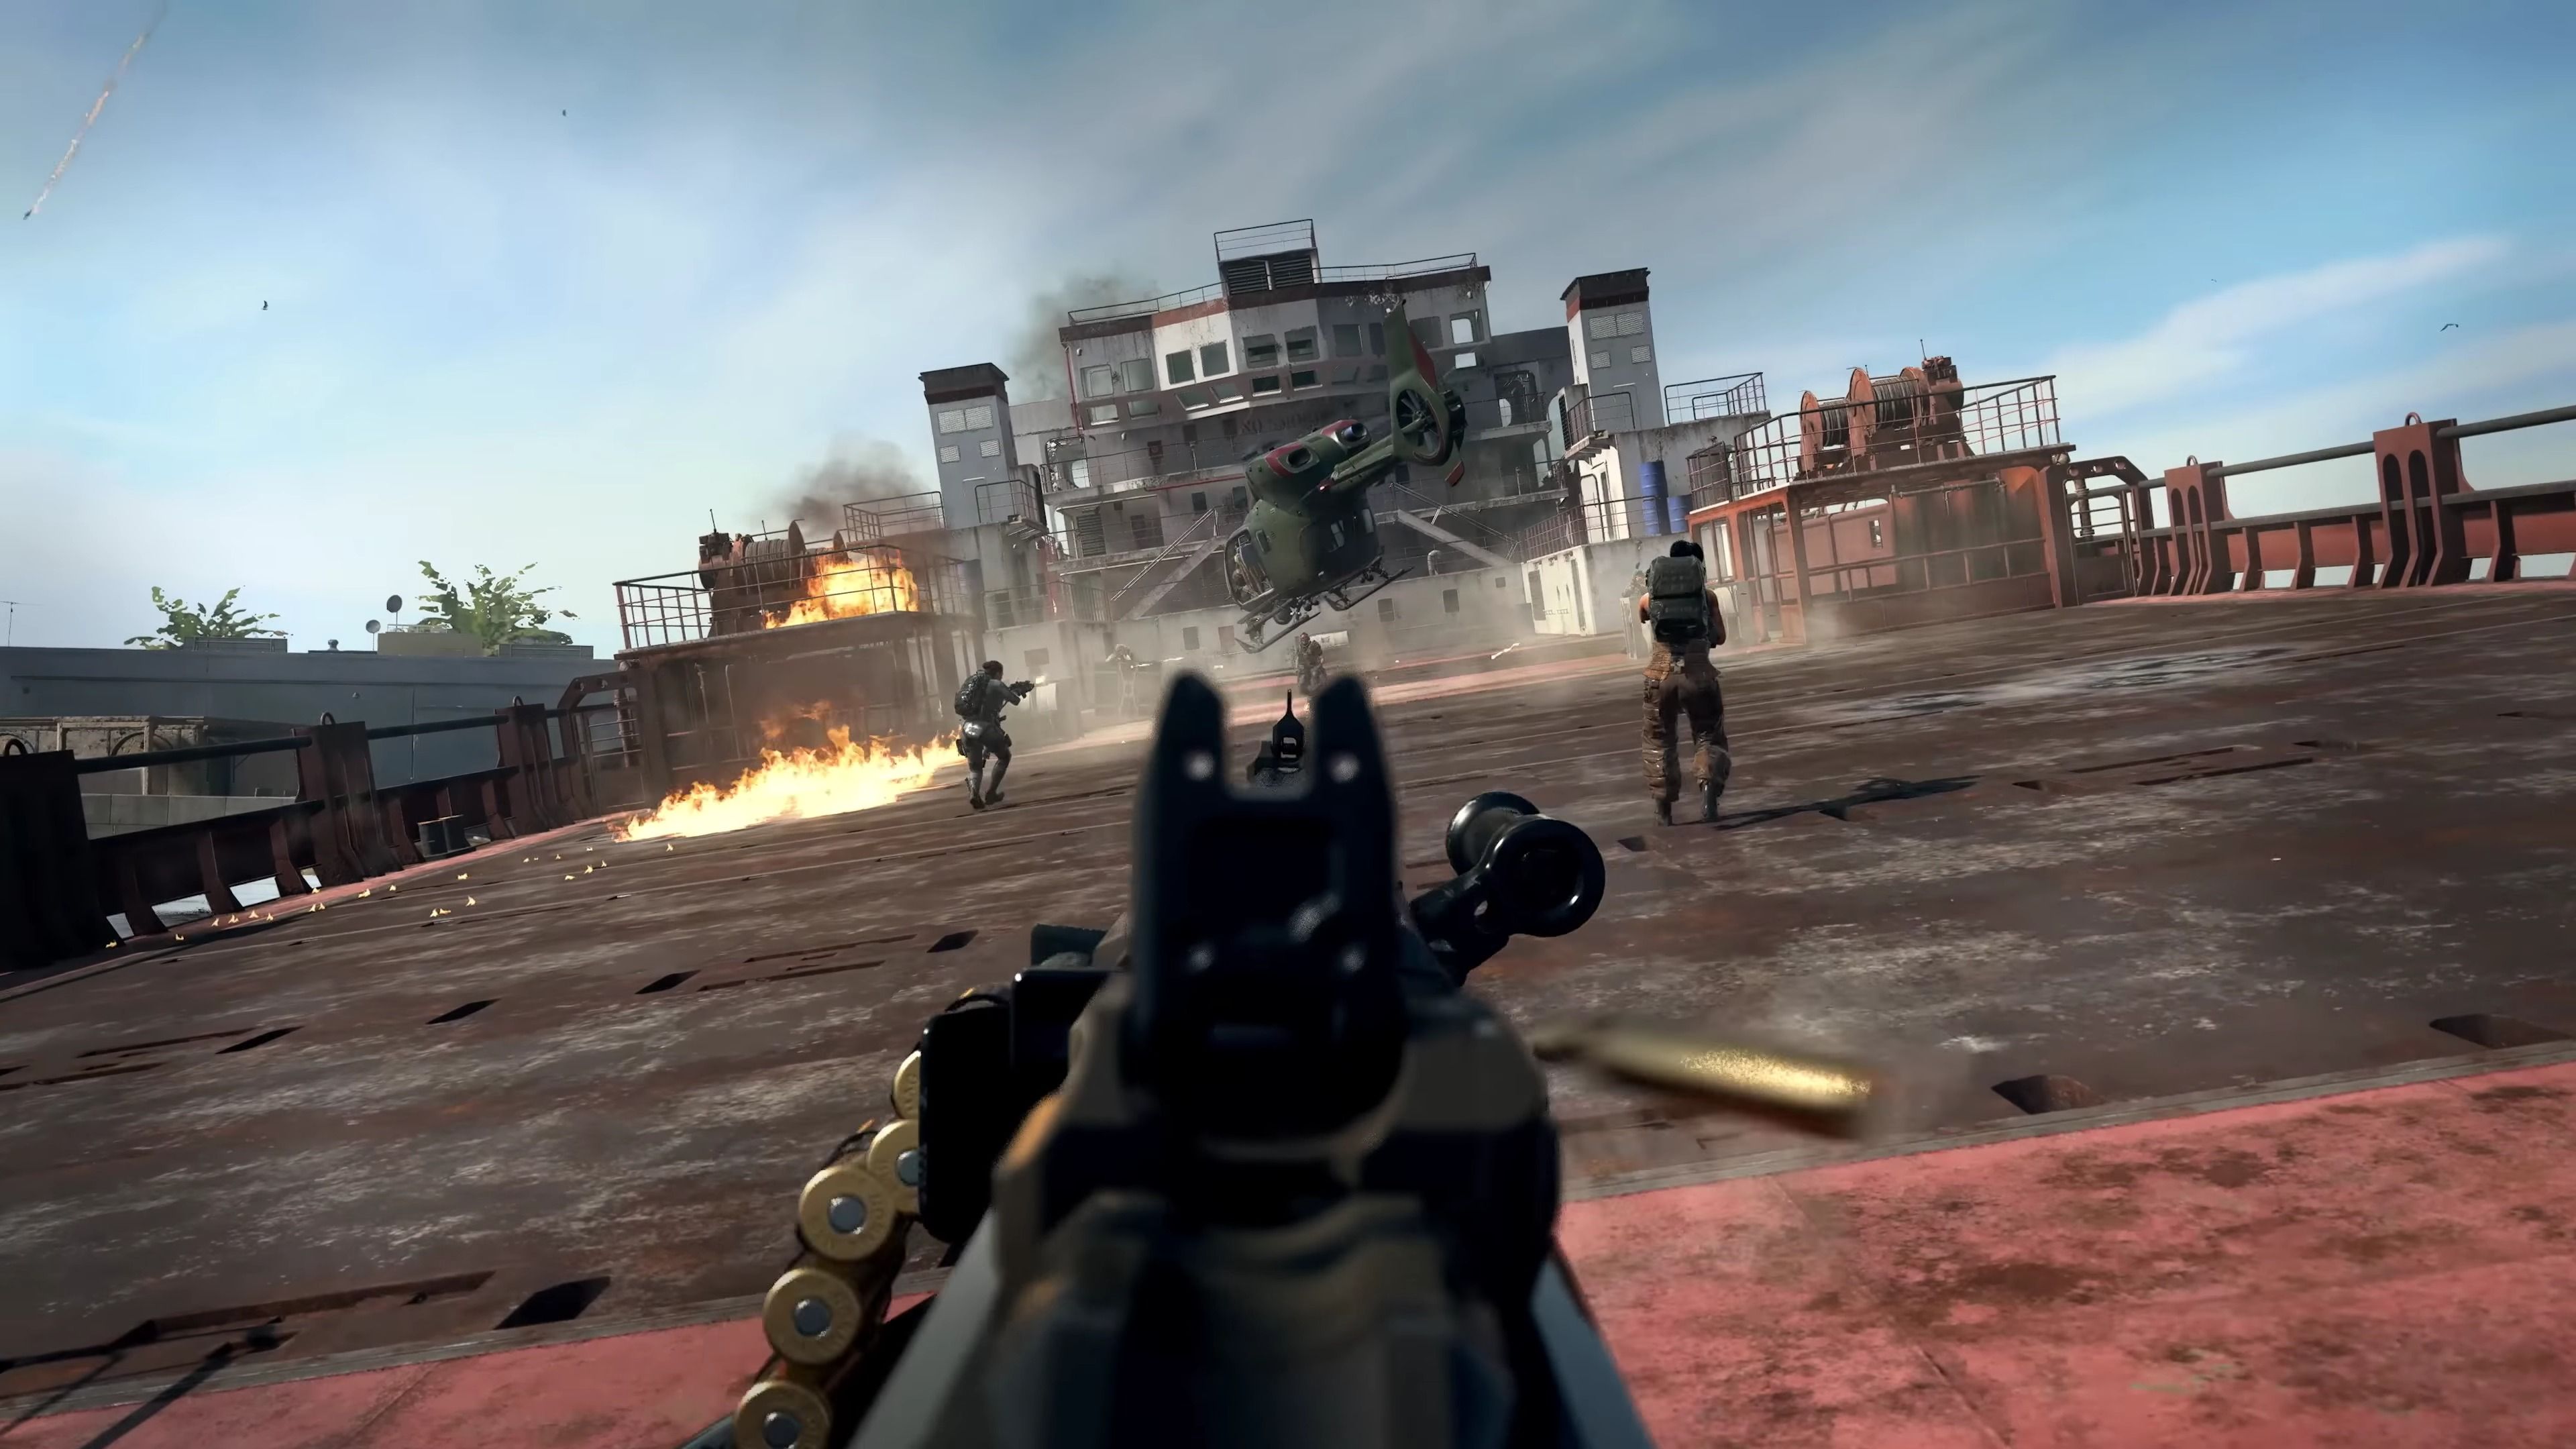 A player shooting at hostile enemies in COD Warzone DMZ